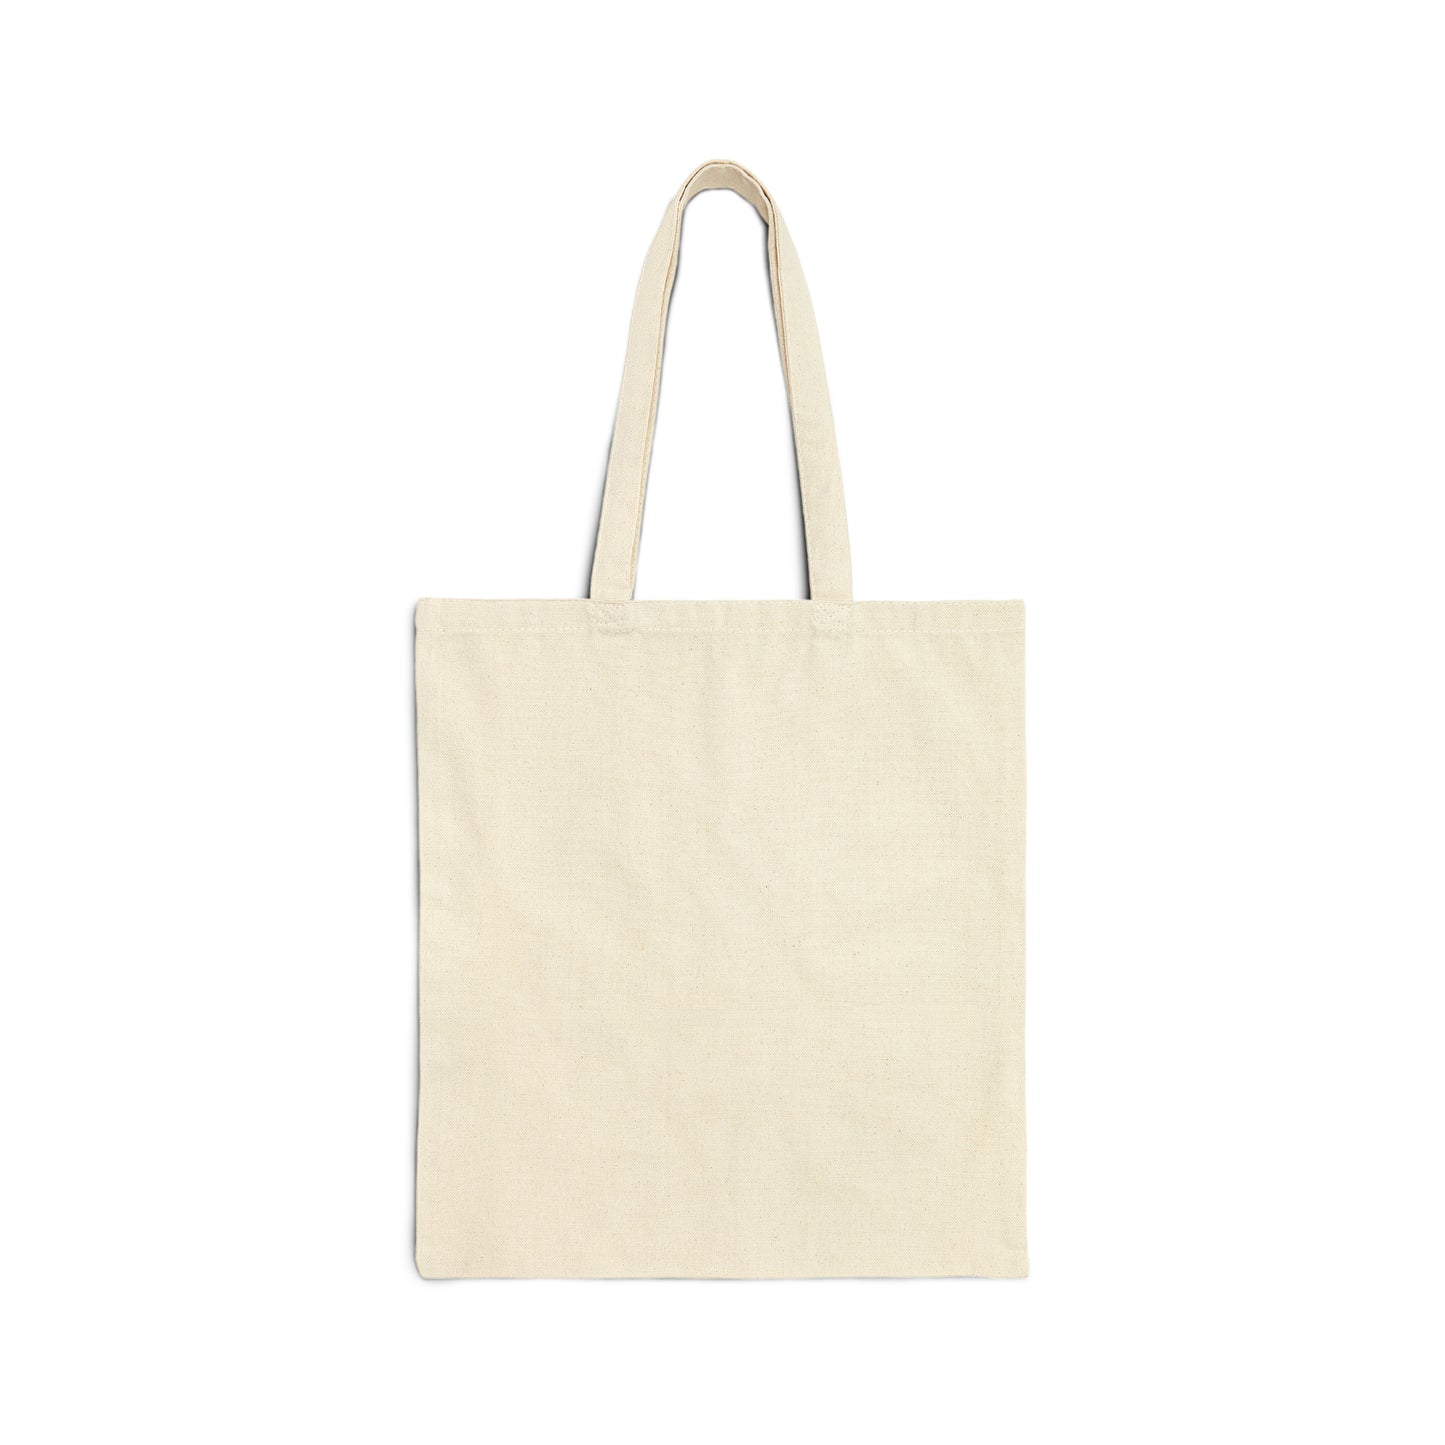 Skeldale House Canvas Tote Bag - All Creatures Great and Small